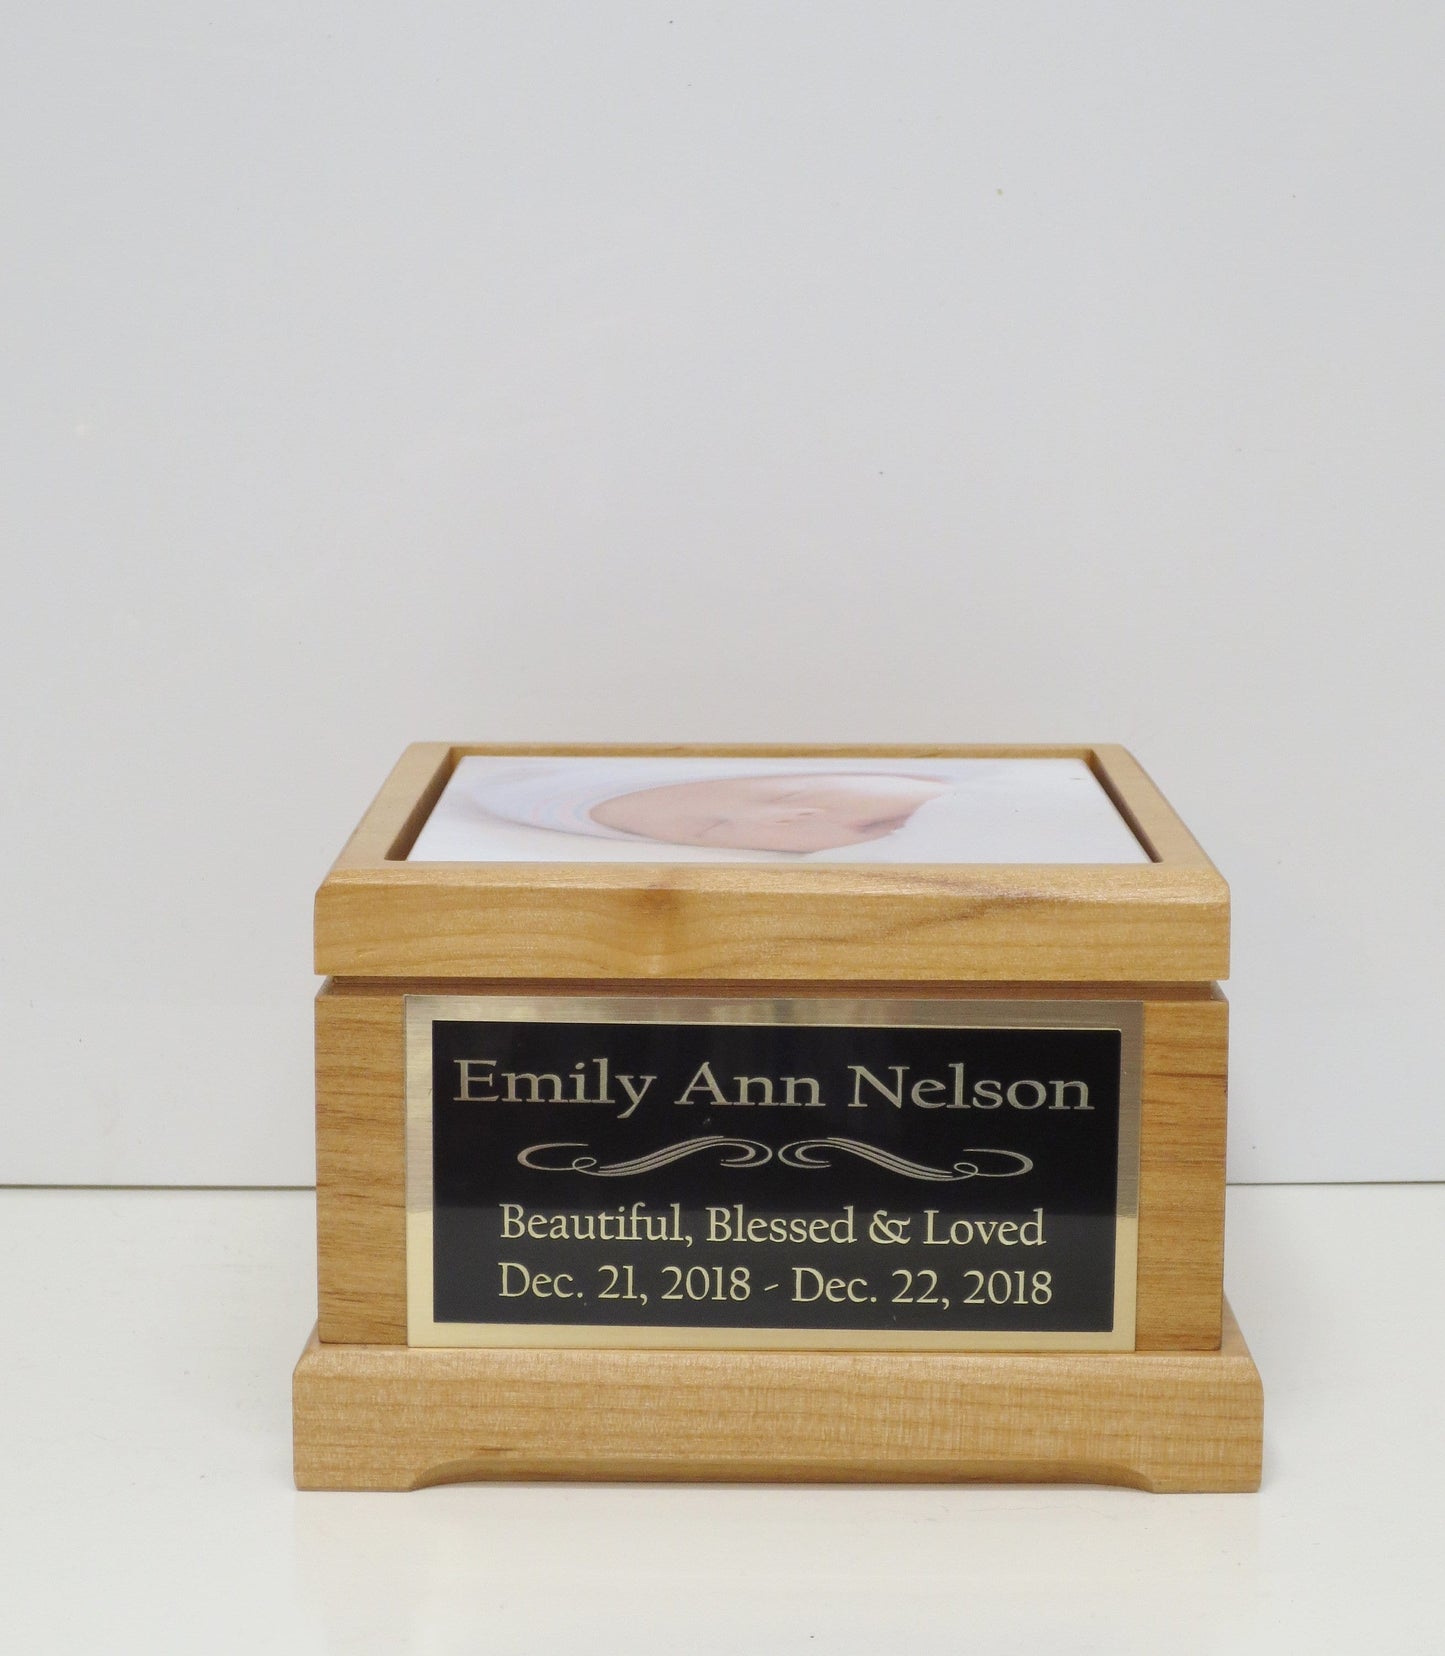 Baby Urn For Ashes Infant Child Urn Baby Cremation Memorial Human Tile Photo & Personalized Engraved Tag Memorial Keepsake Red Alder 25 lbs